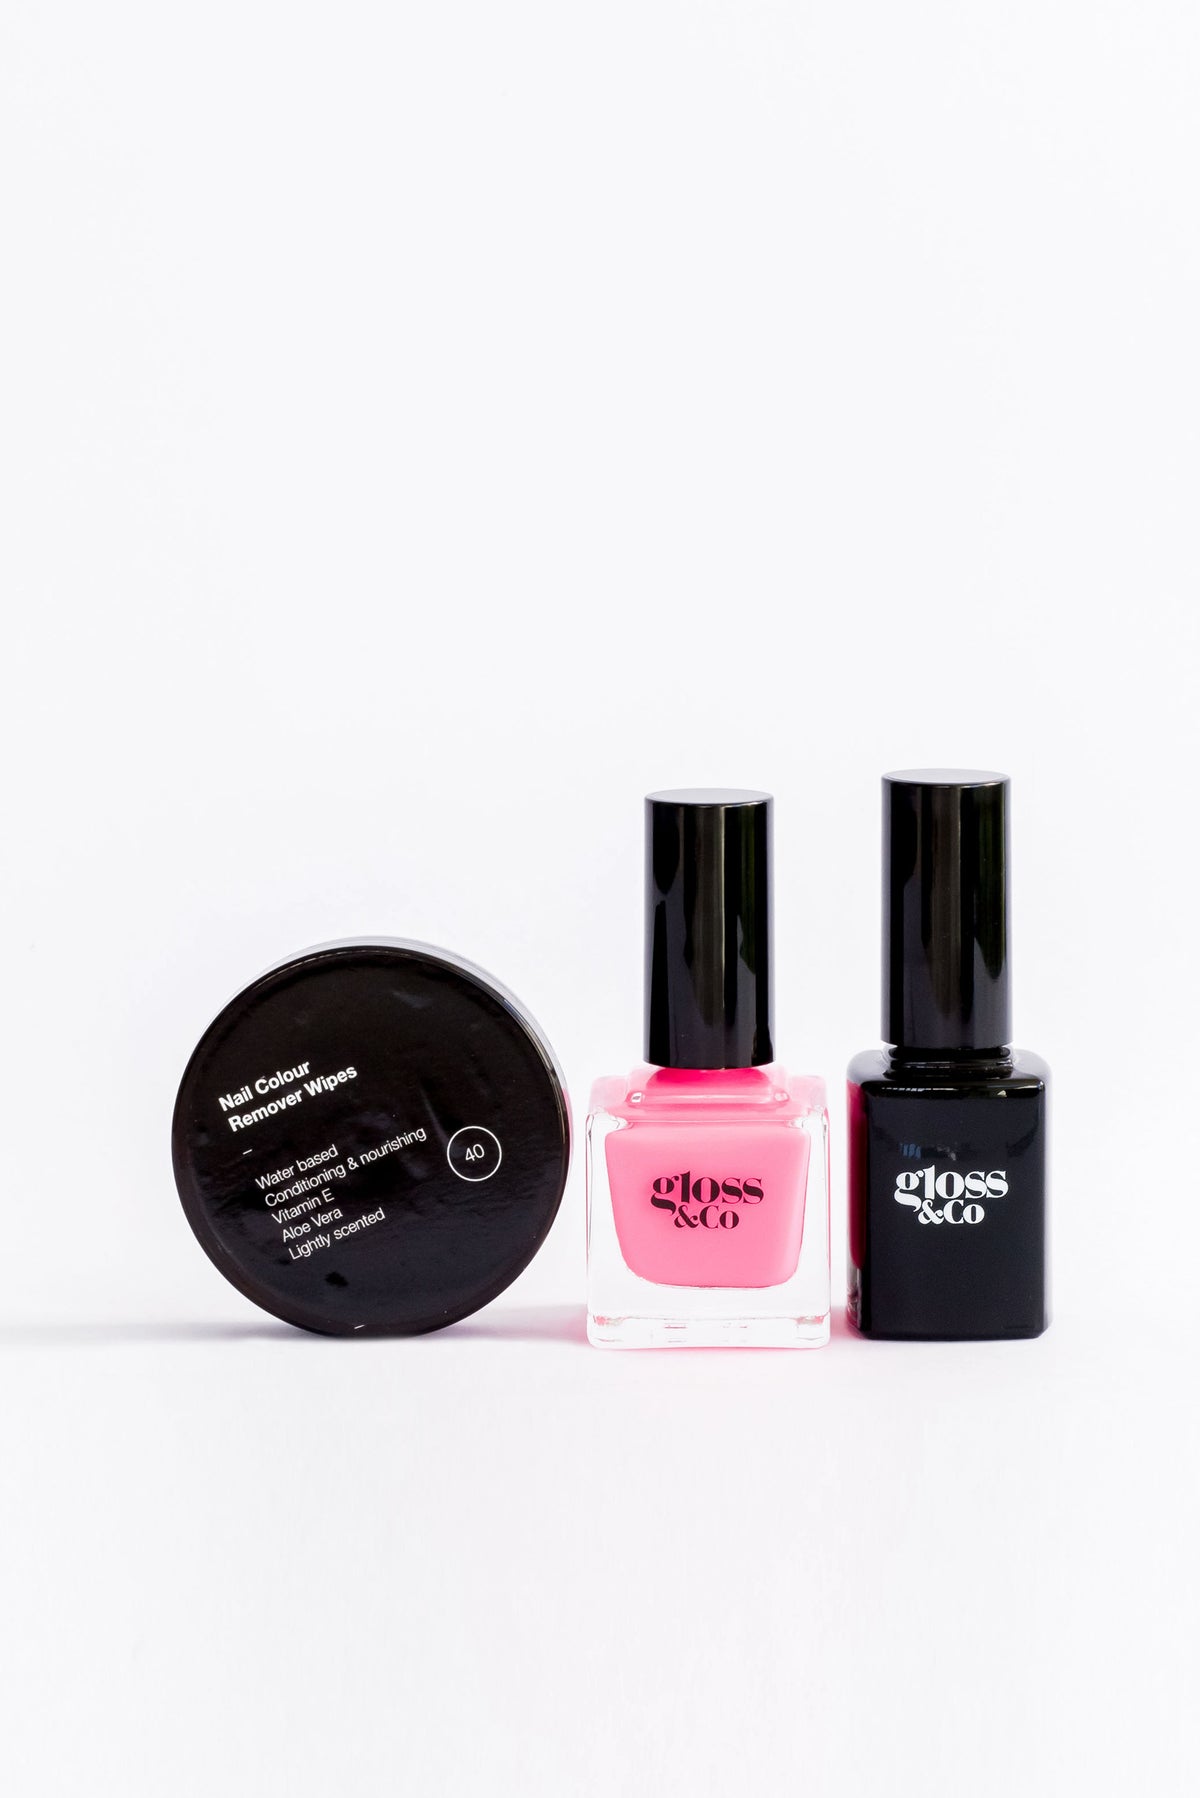 A Gloss and Colour Pack